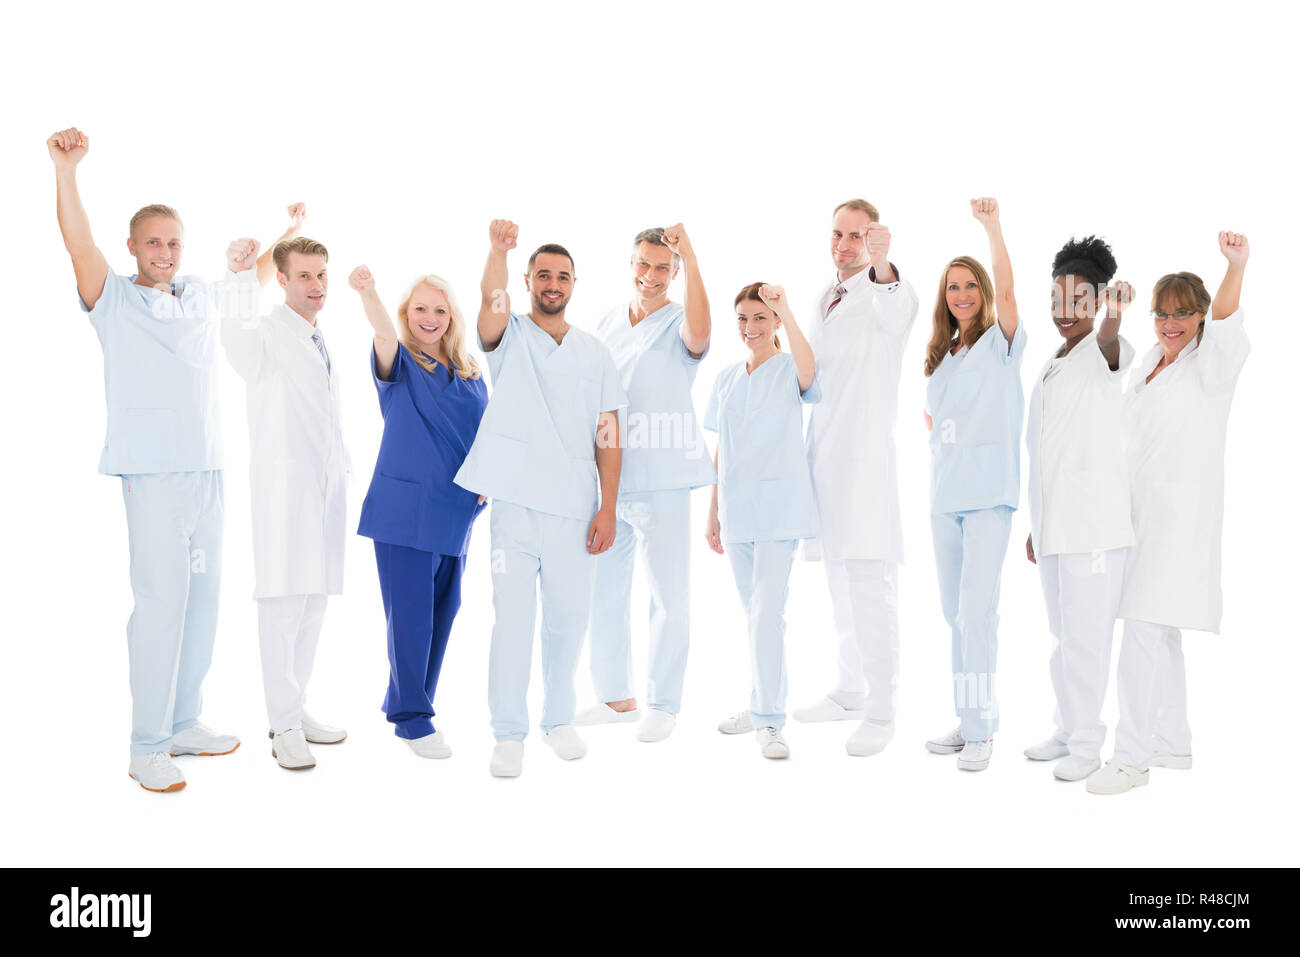 Multiethnic Medical Team Standing With Arms Raised Stock Photo